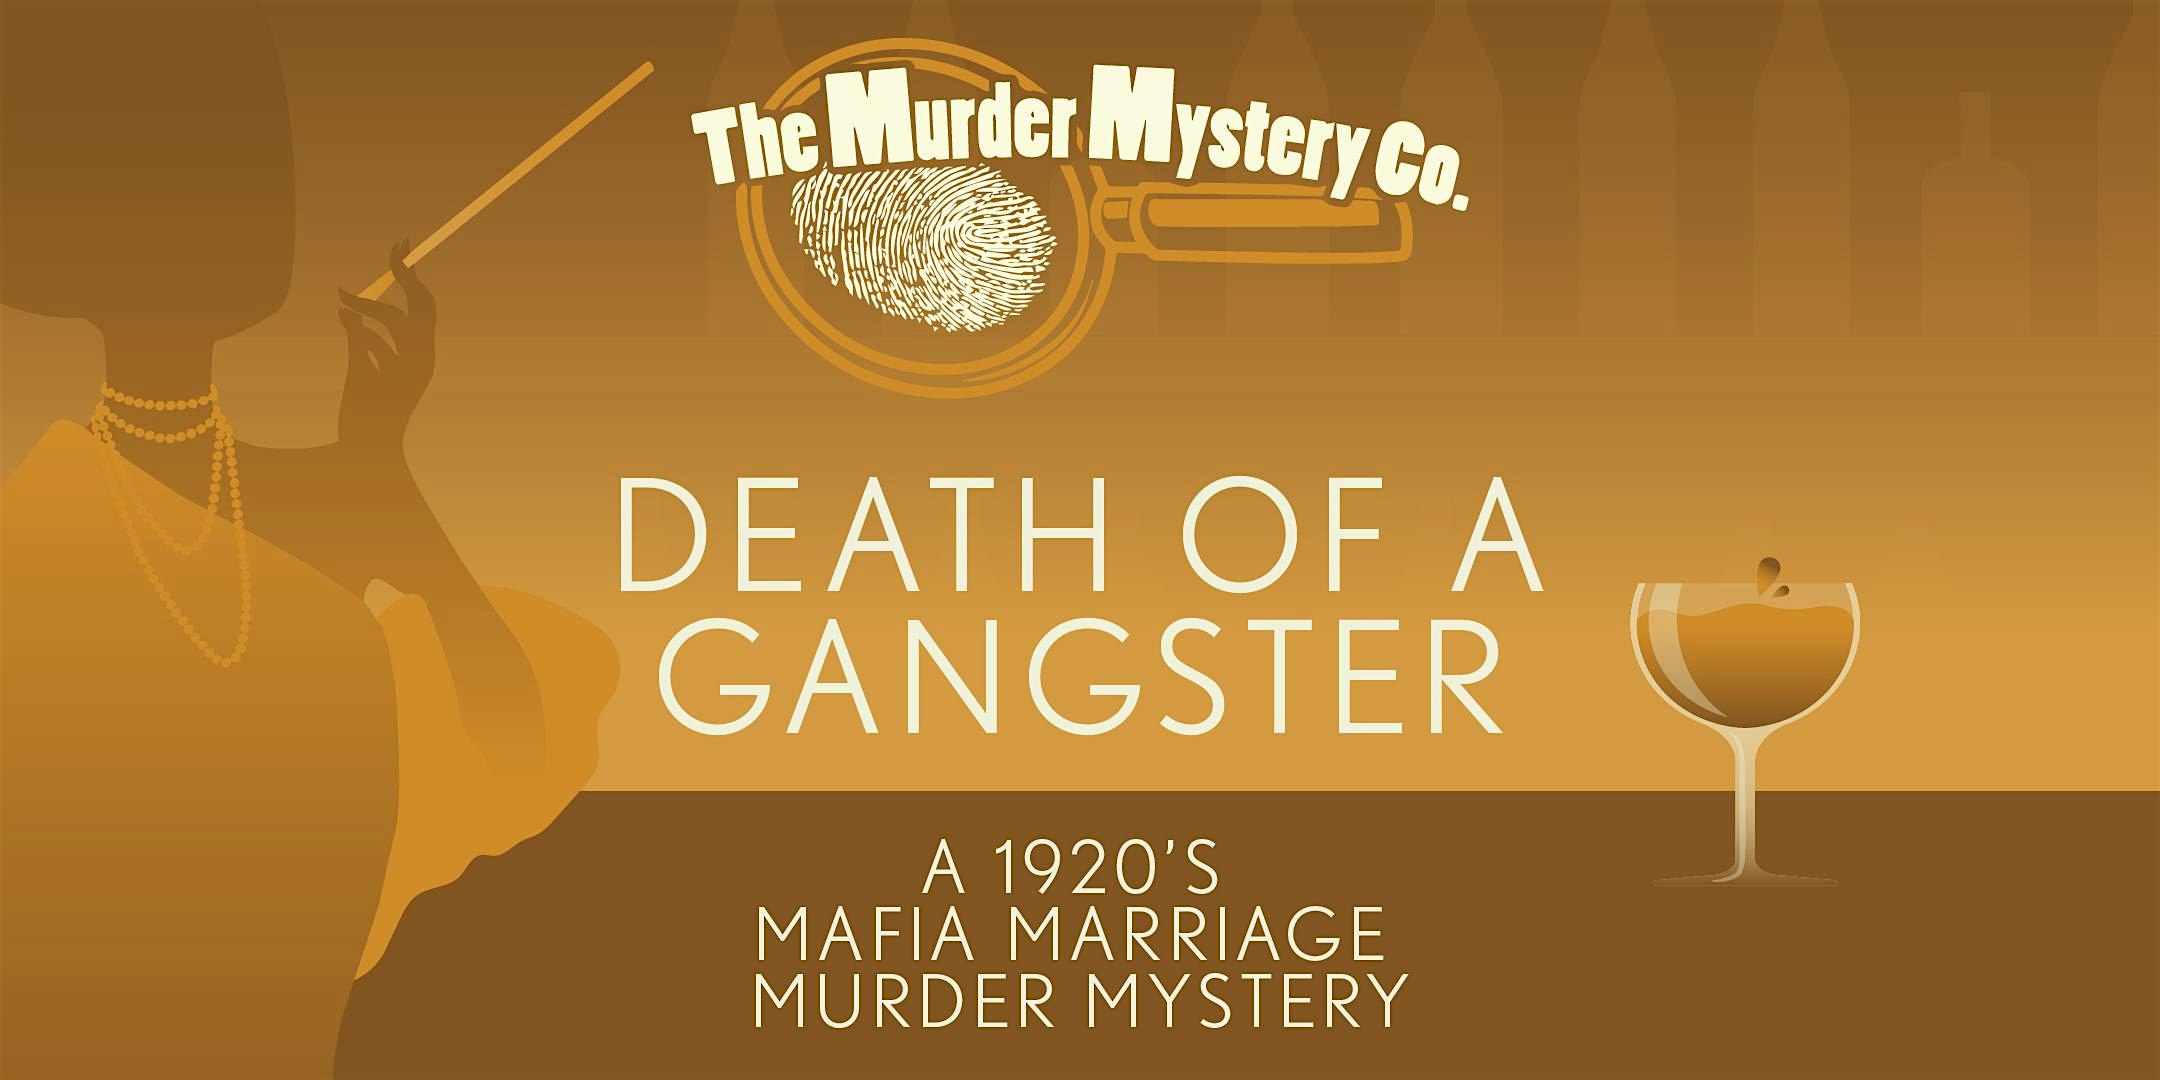 Murder Mystery Dinner Theater Show in Denver: Death of a Gangster